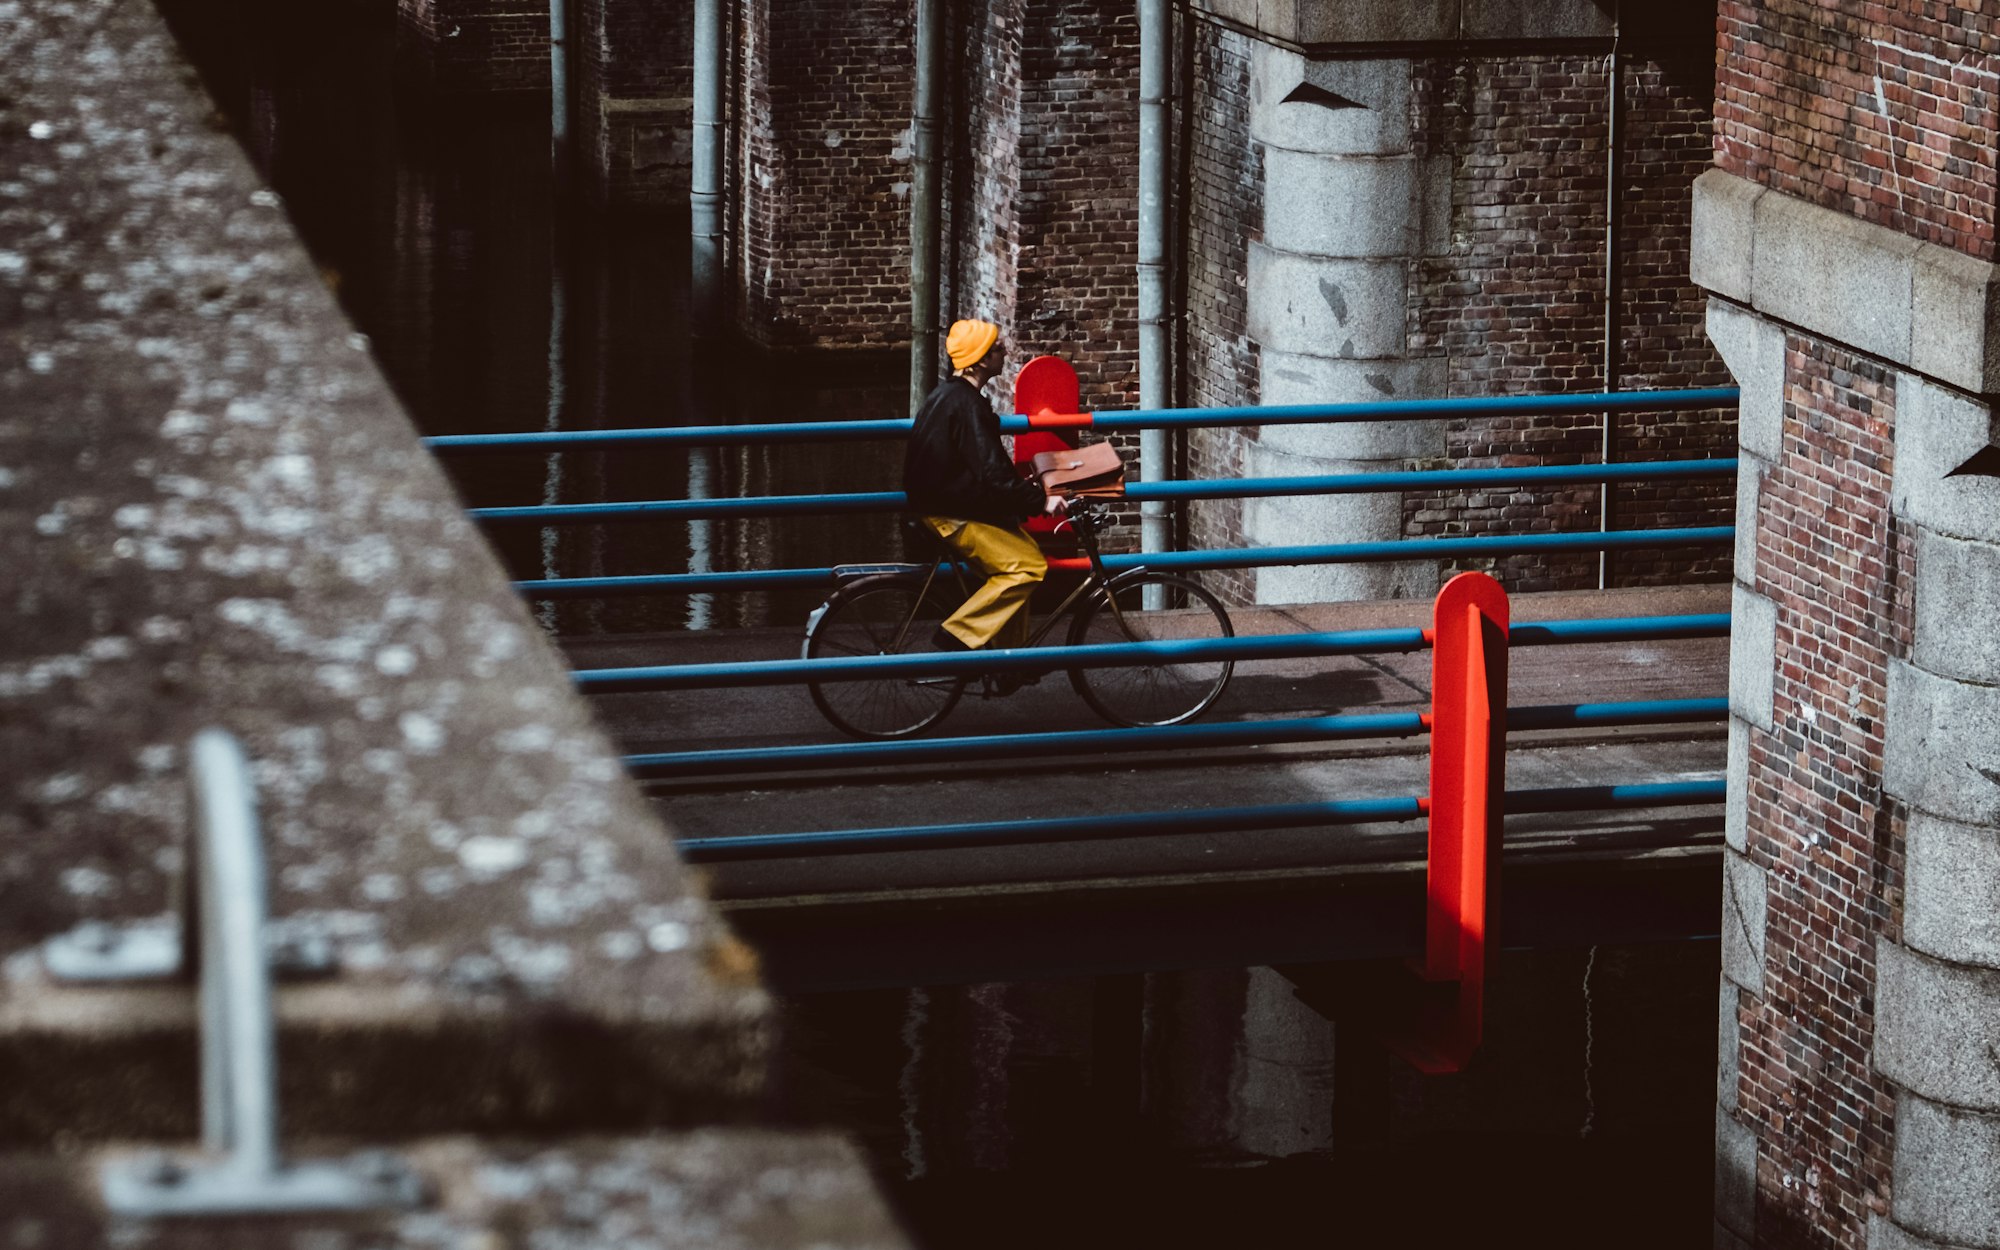 This guy was really standing out with his yellow jeans and orange beanie. I also like the contrast with the blue and red bridge. Took this in Amsterdam a while ago.